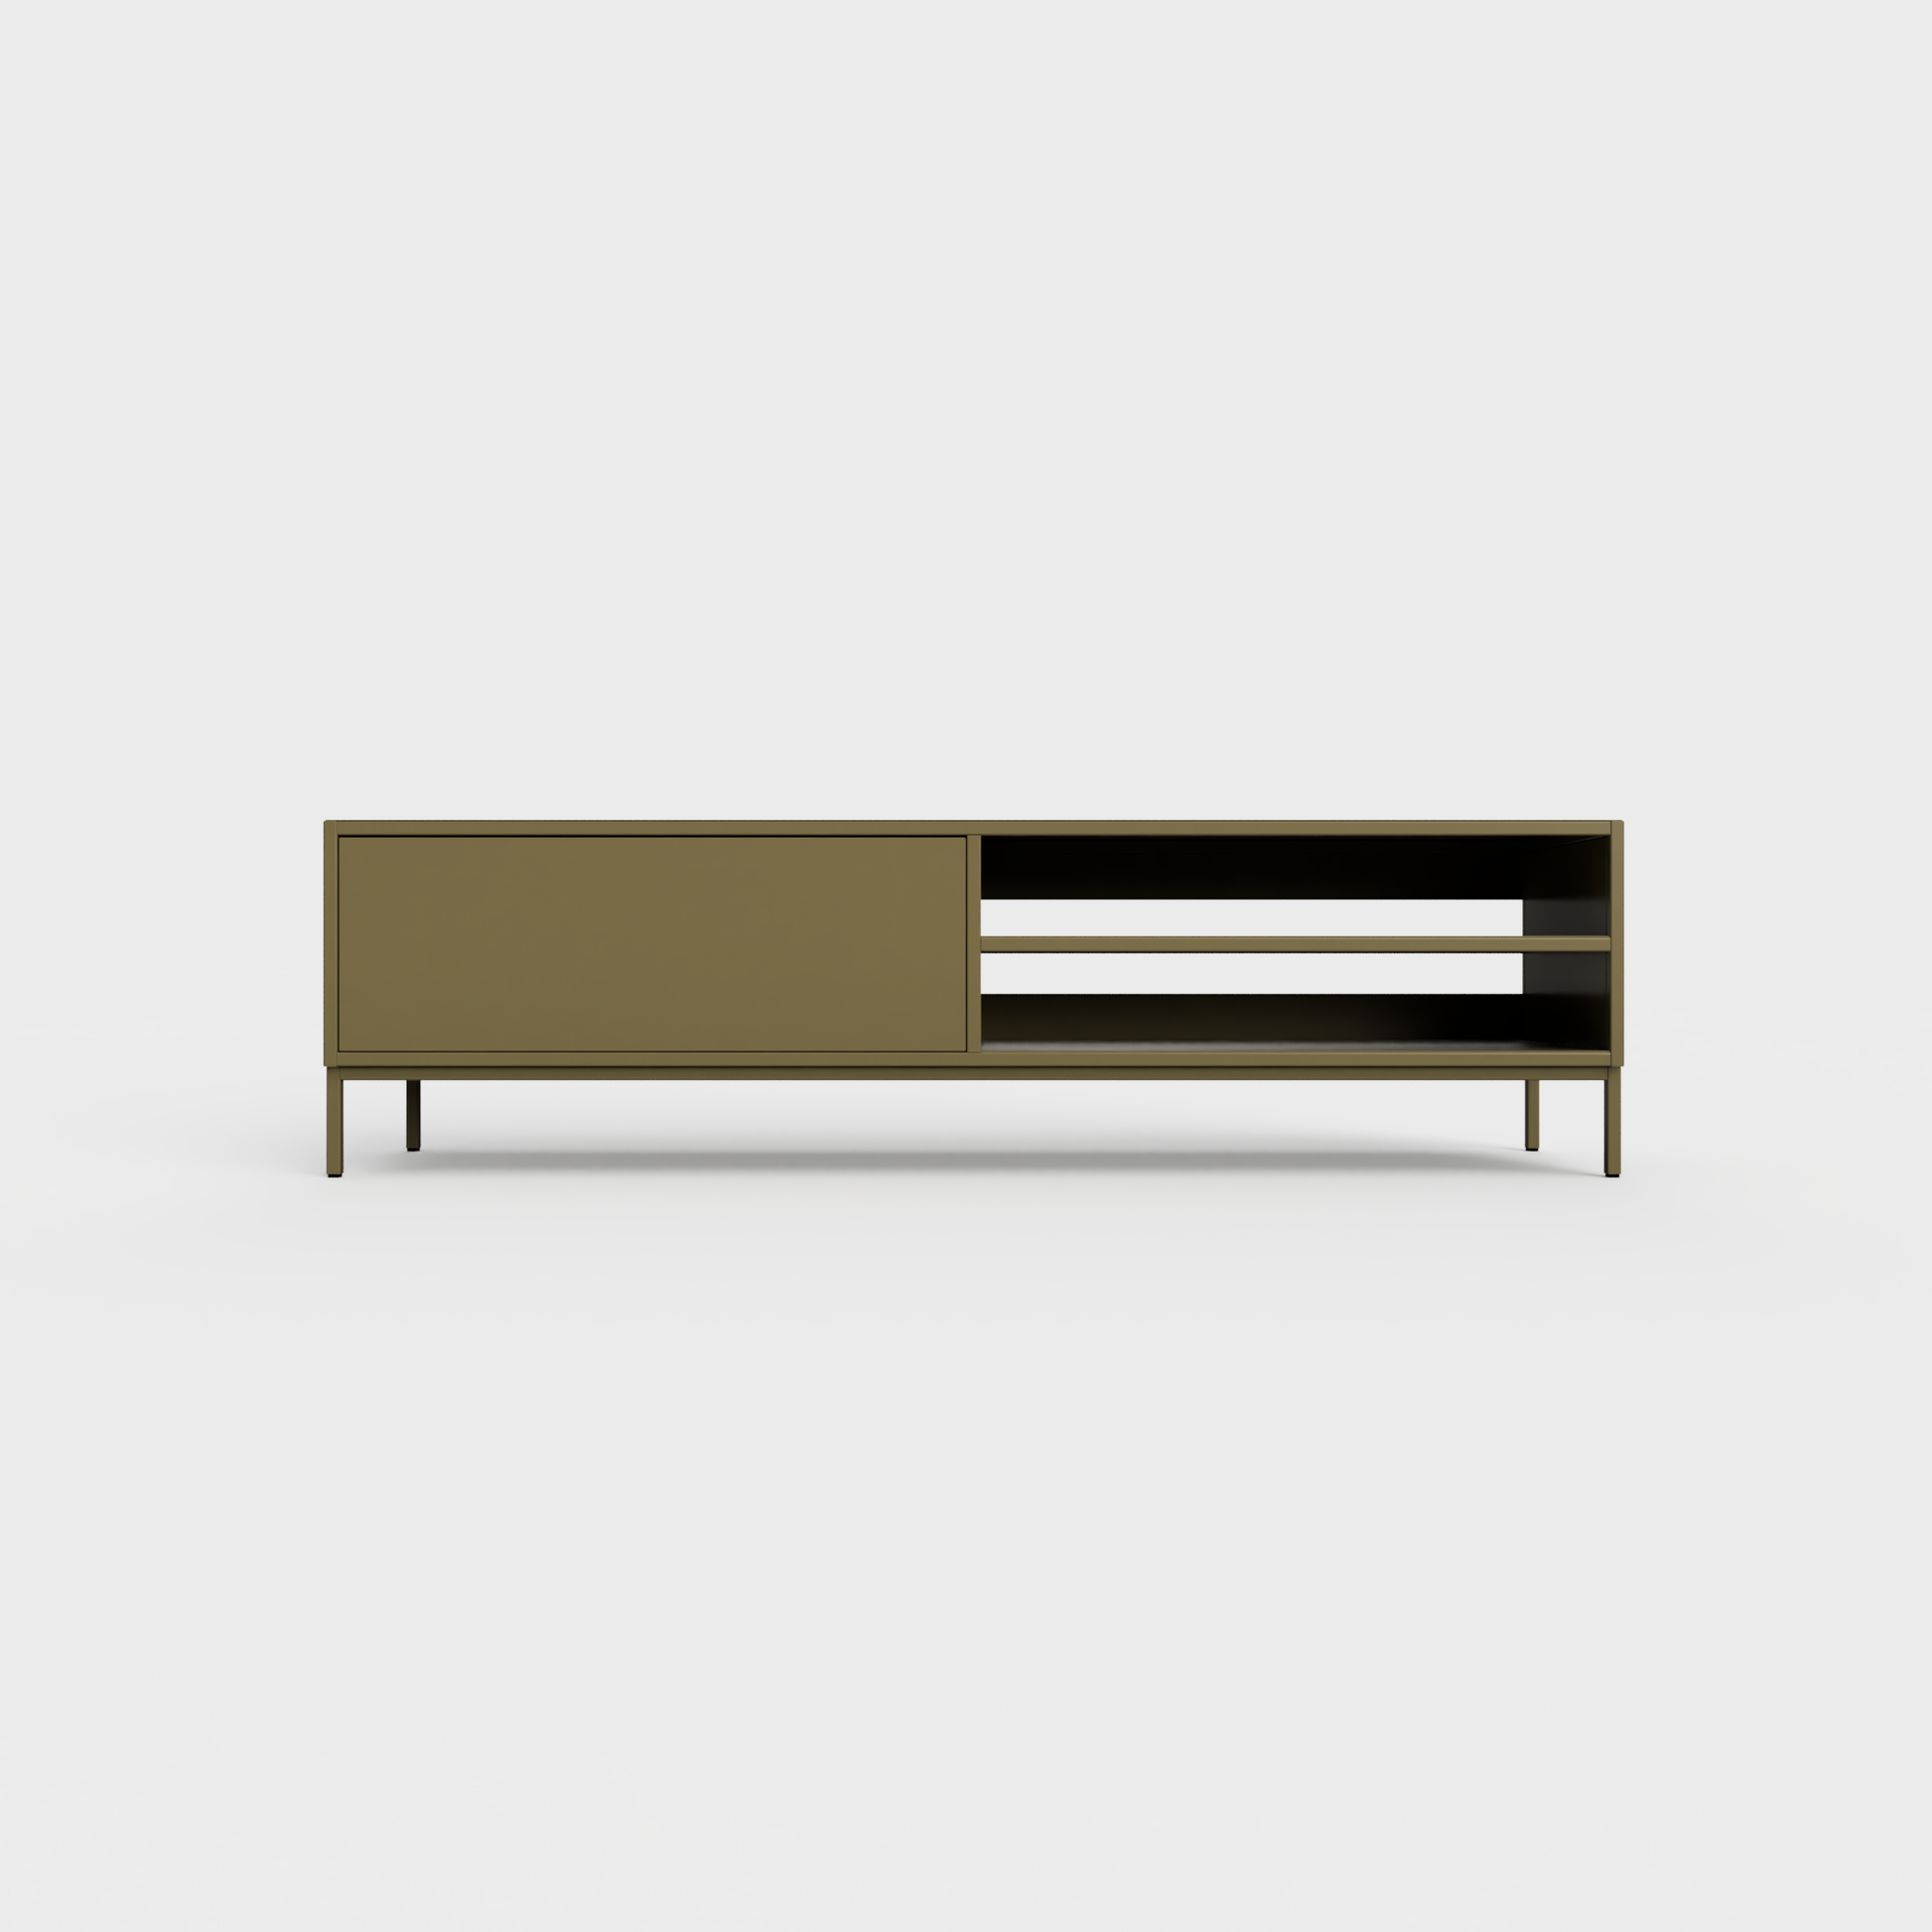 Prunus 02 Lowboard in Brown Olive color, powder-coated steel, elegant and modern piece of furniture for your living room